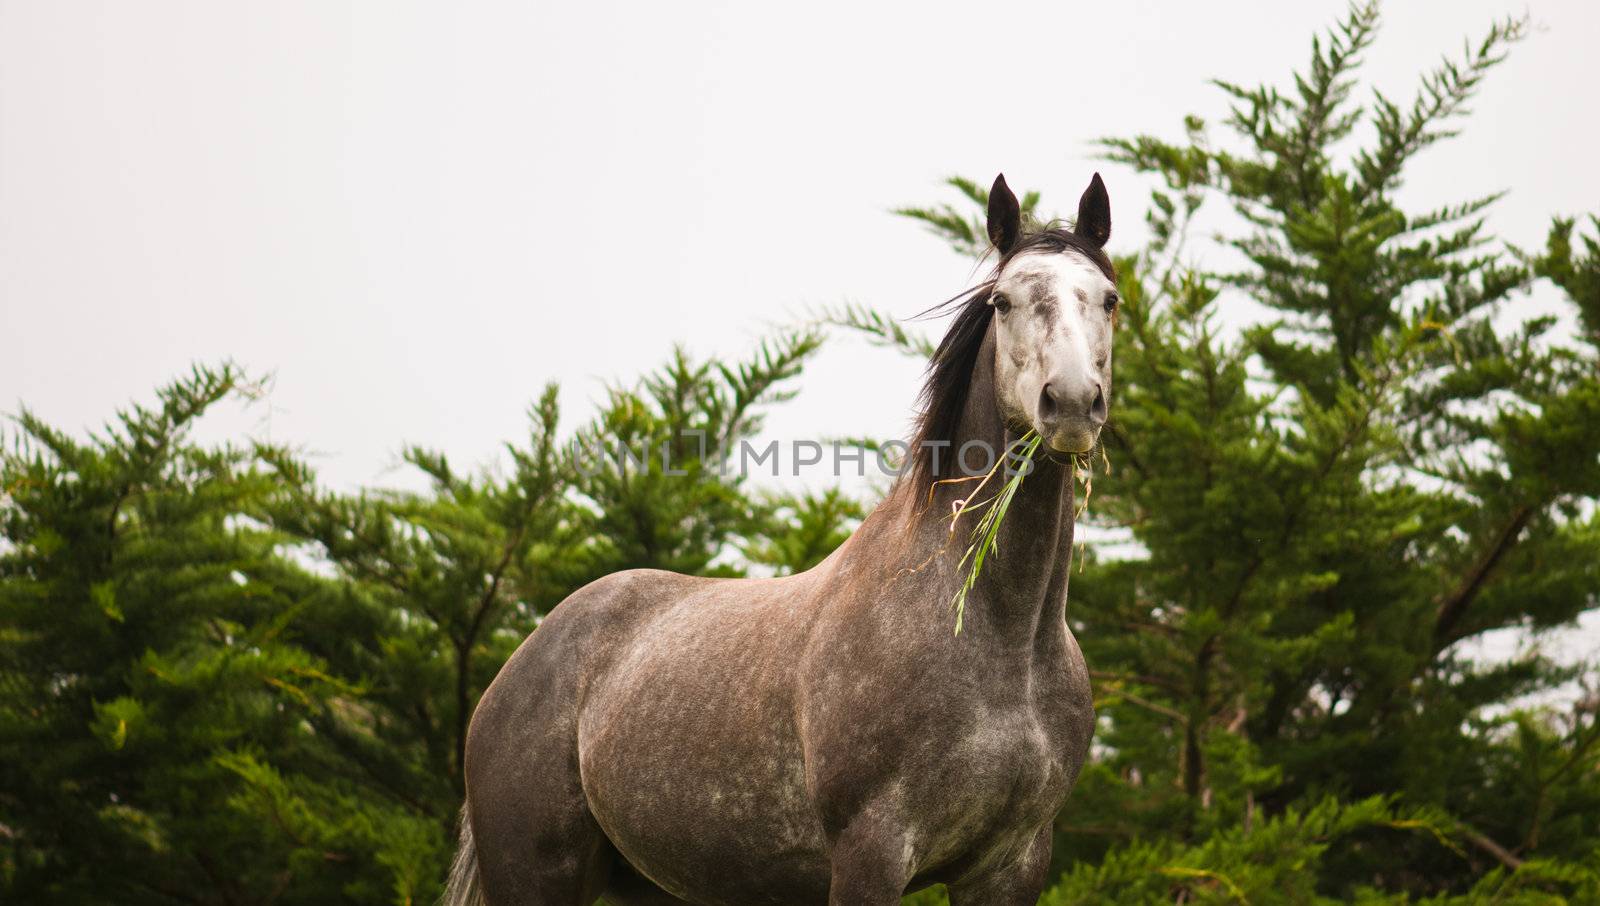 Wild horse in the wilderness on a cloudy day